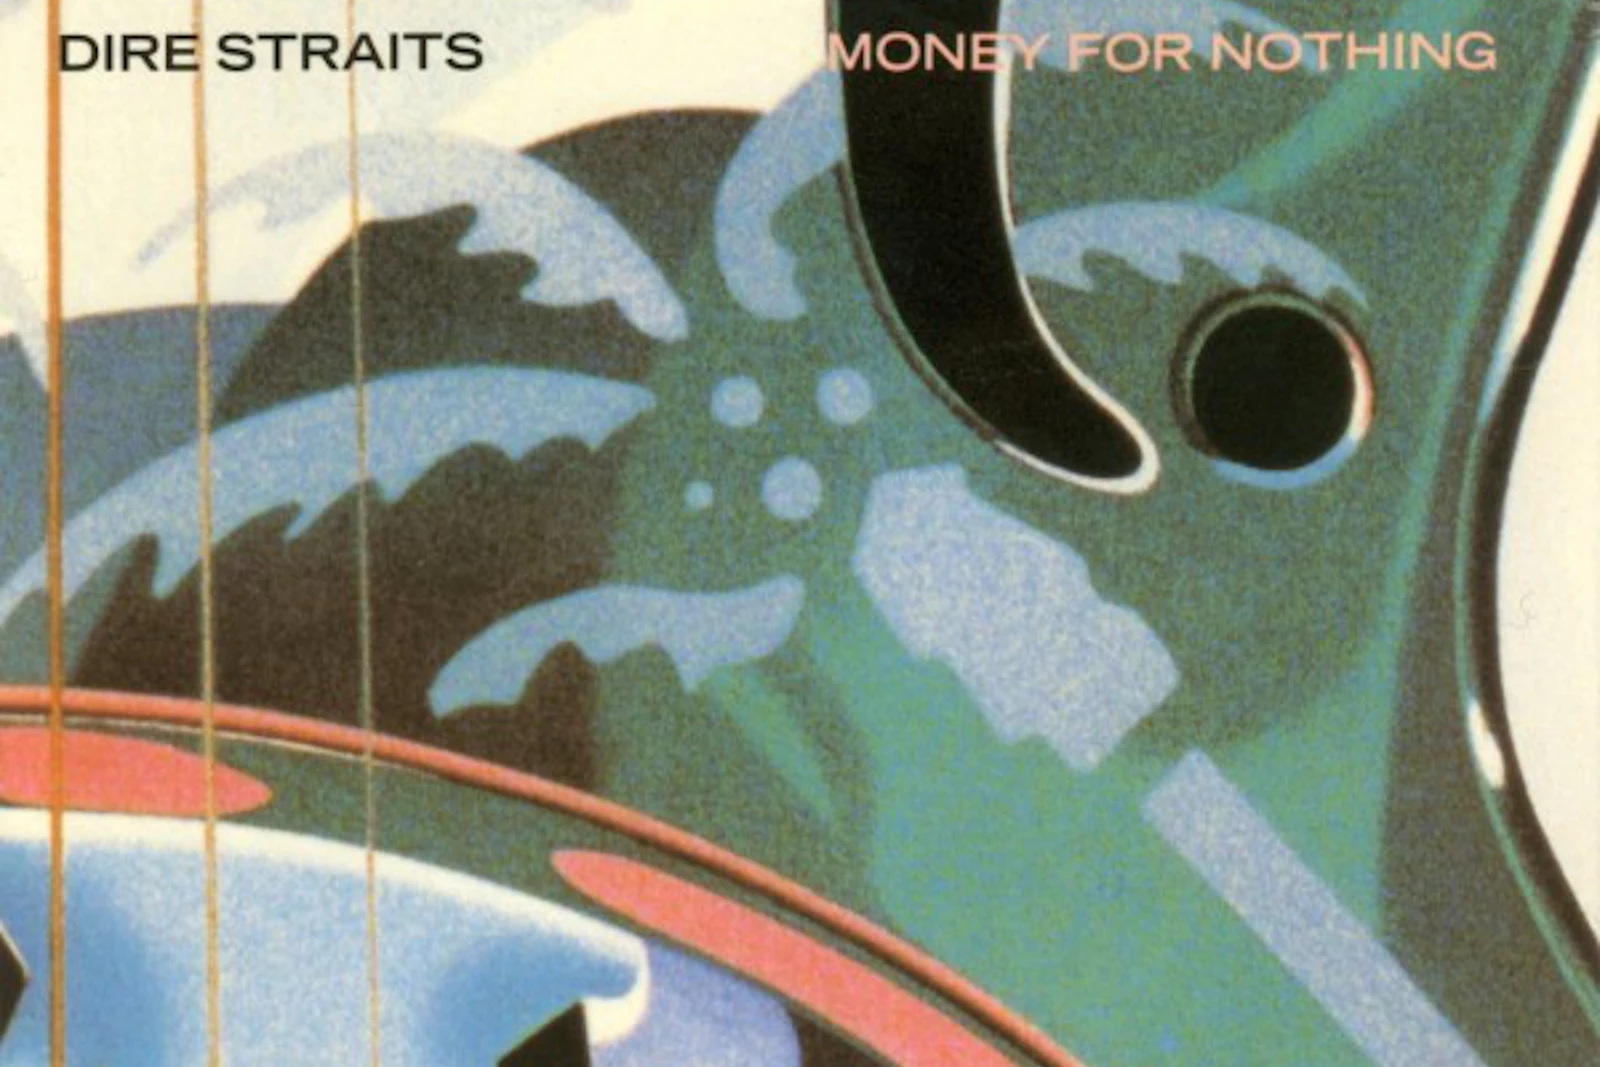 dire straits album cover money for nothing